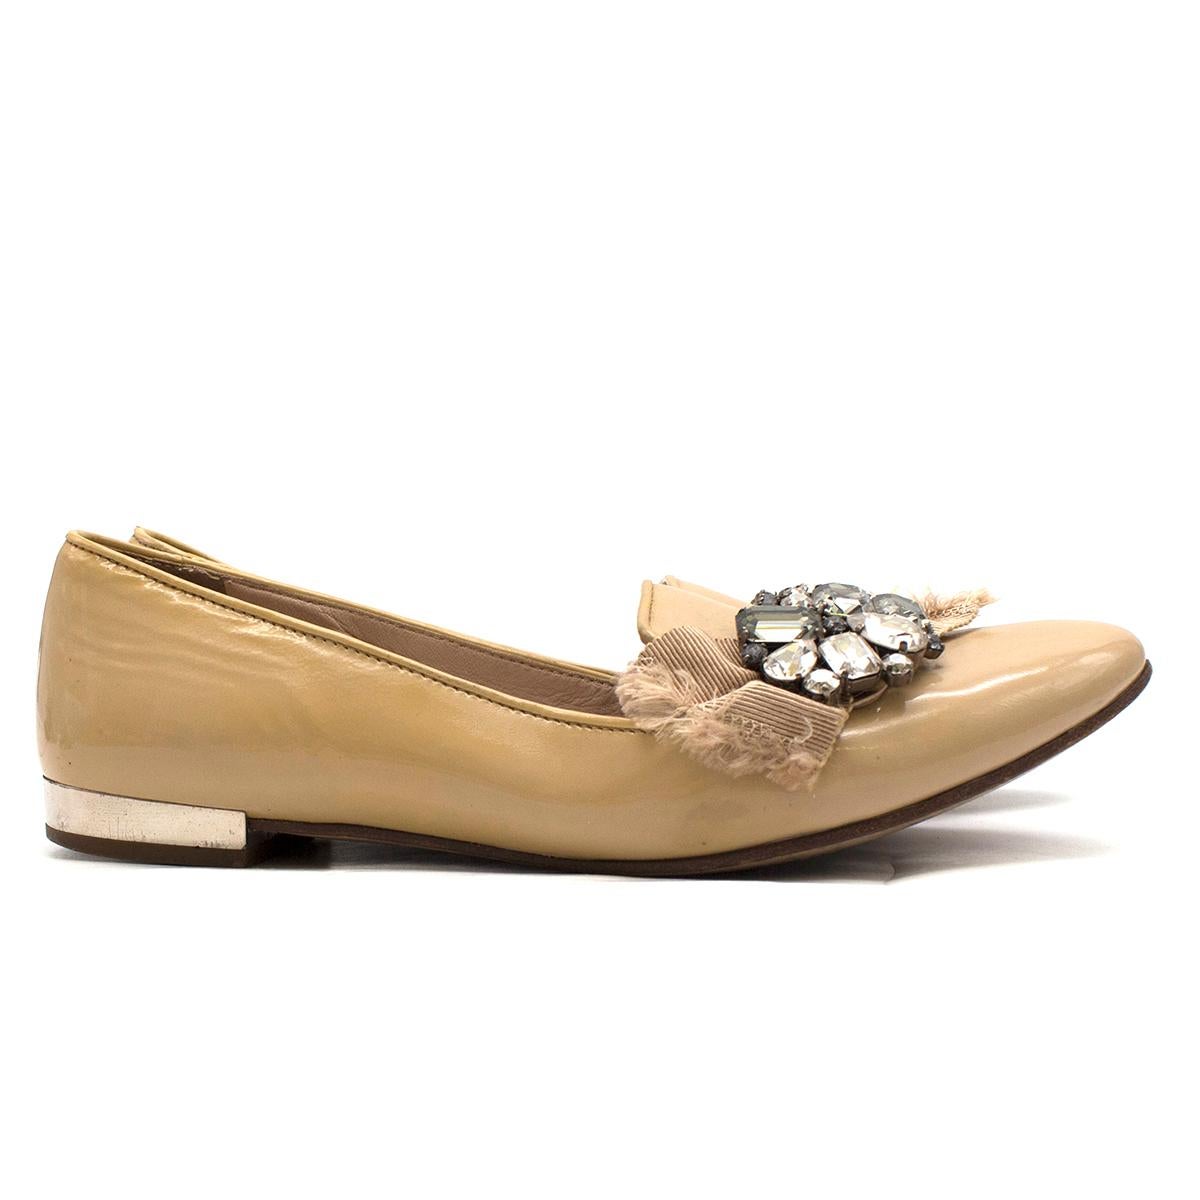 Miu Miu Biege Patent Leather Crystal Embroidered Loafers 

-Beige, patent loafers 
-Crystal embroidery 
-Beige ribbon detail 
-Slip-on style
-Silver slight heel
-Light pink leather insole

Please note, these items are pre-owned and may show some